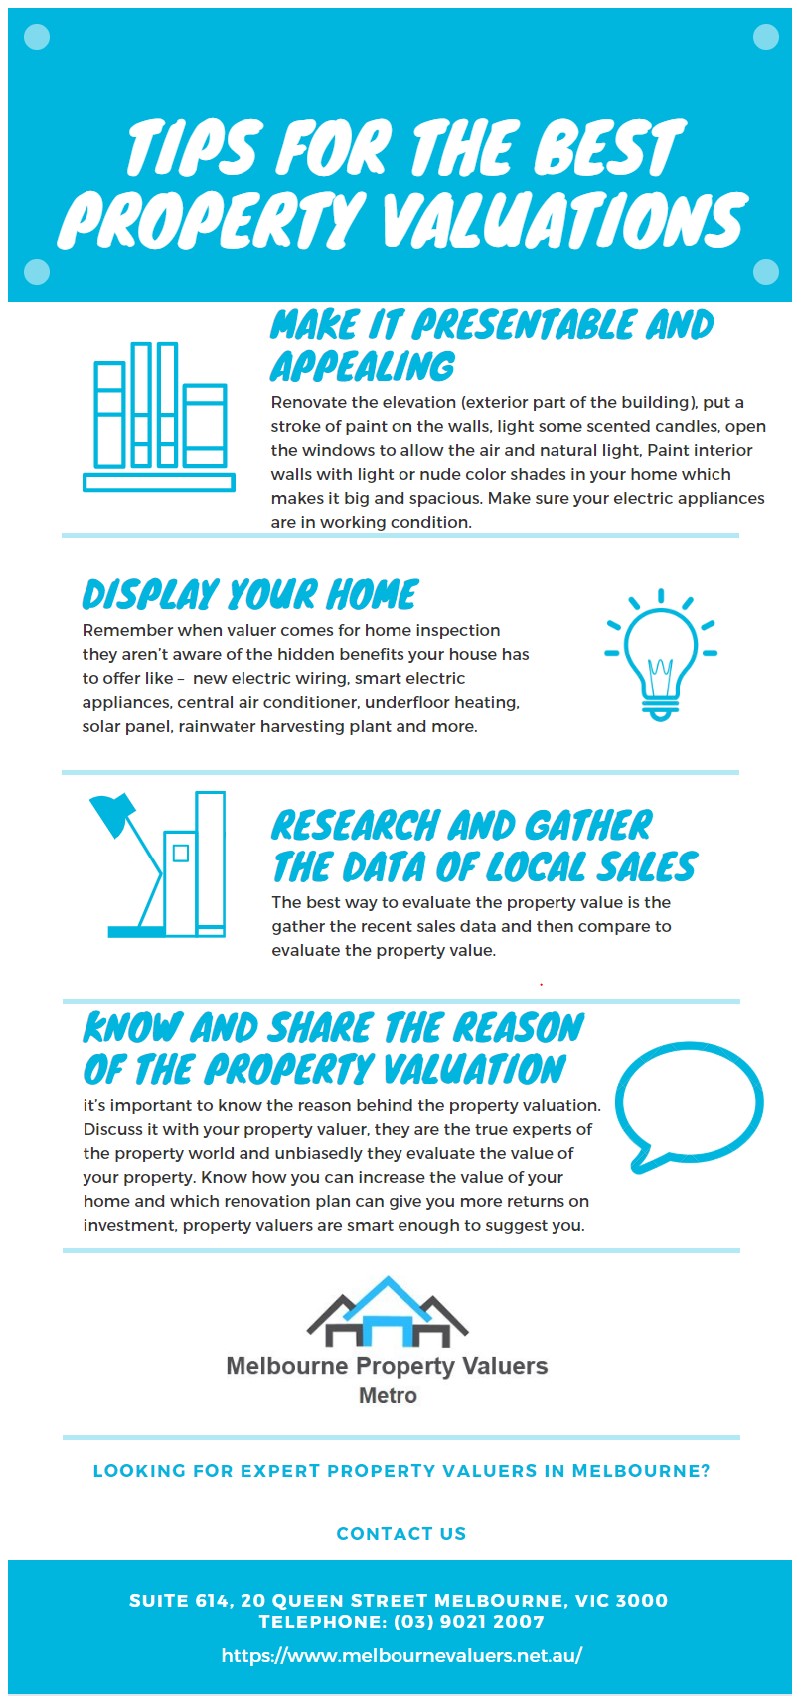 Tips for the Best Property Valuations